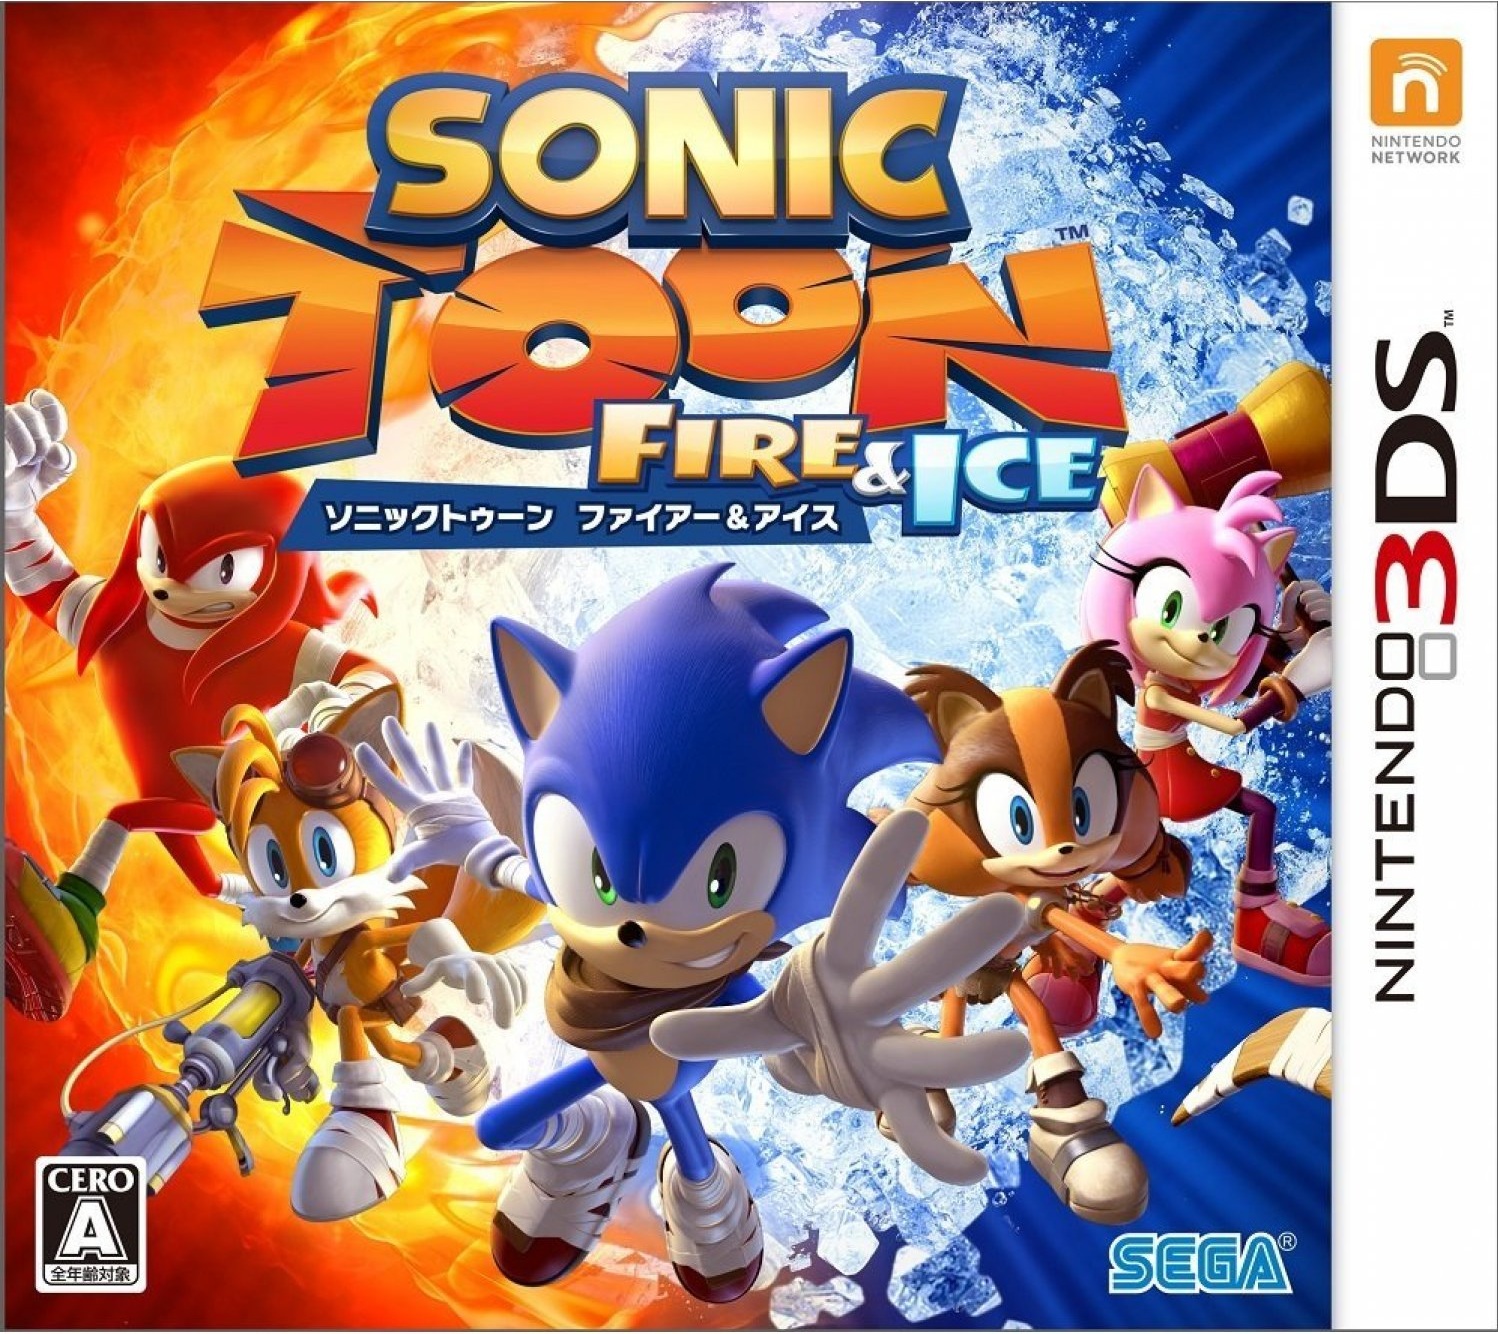 sonic-boom-fire-ice-details-launchbox-games-database